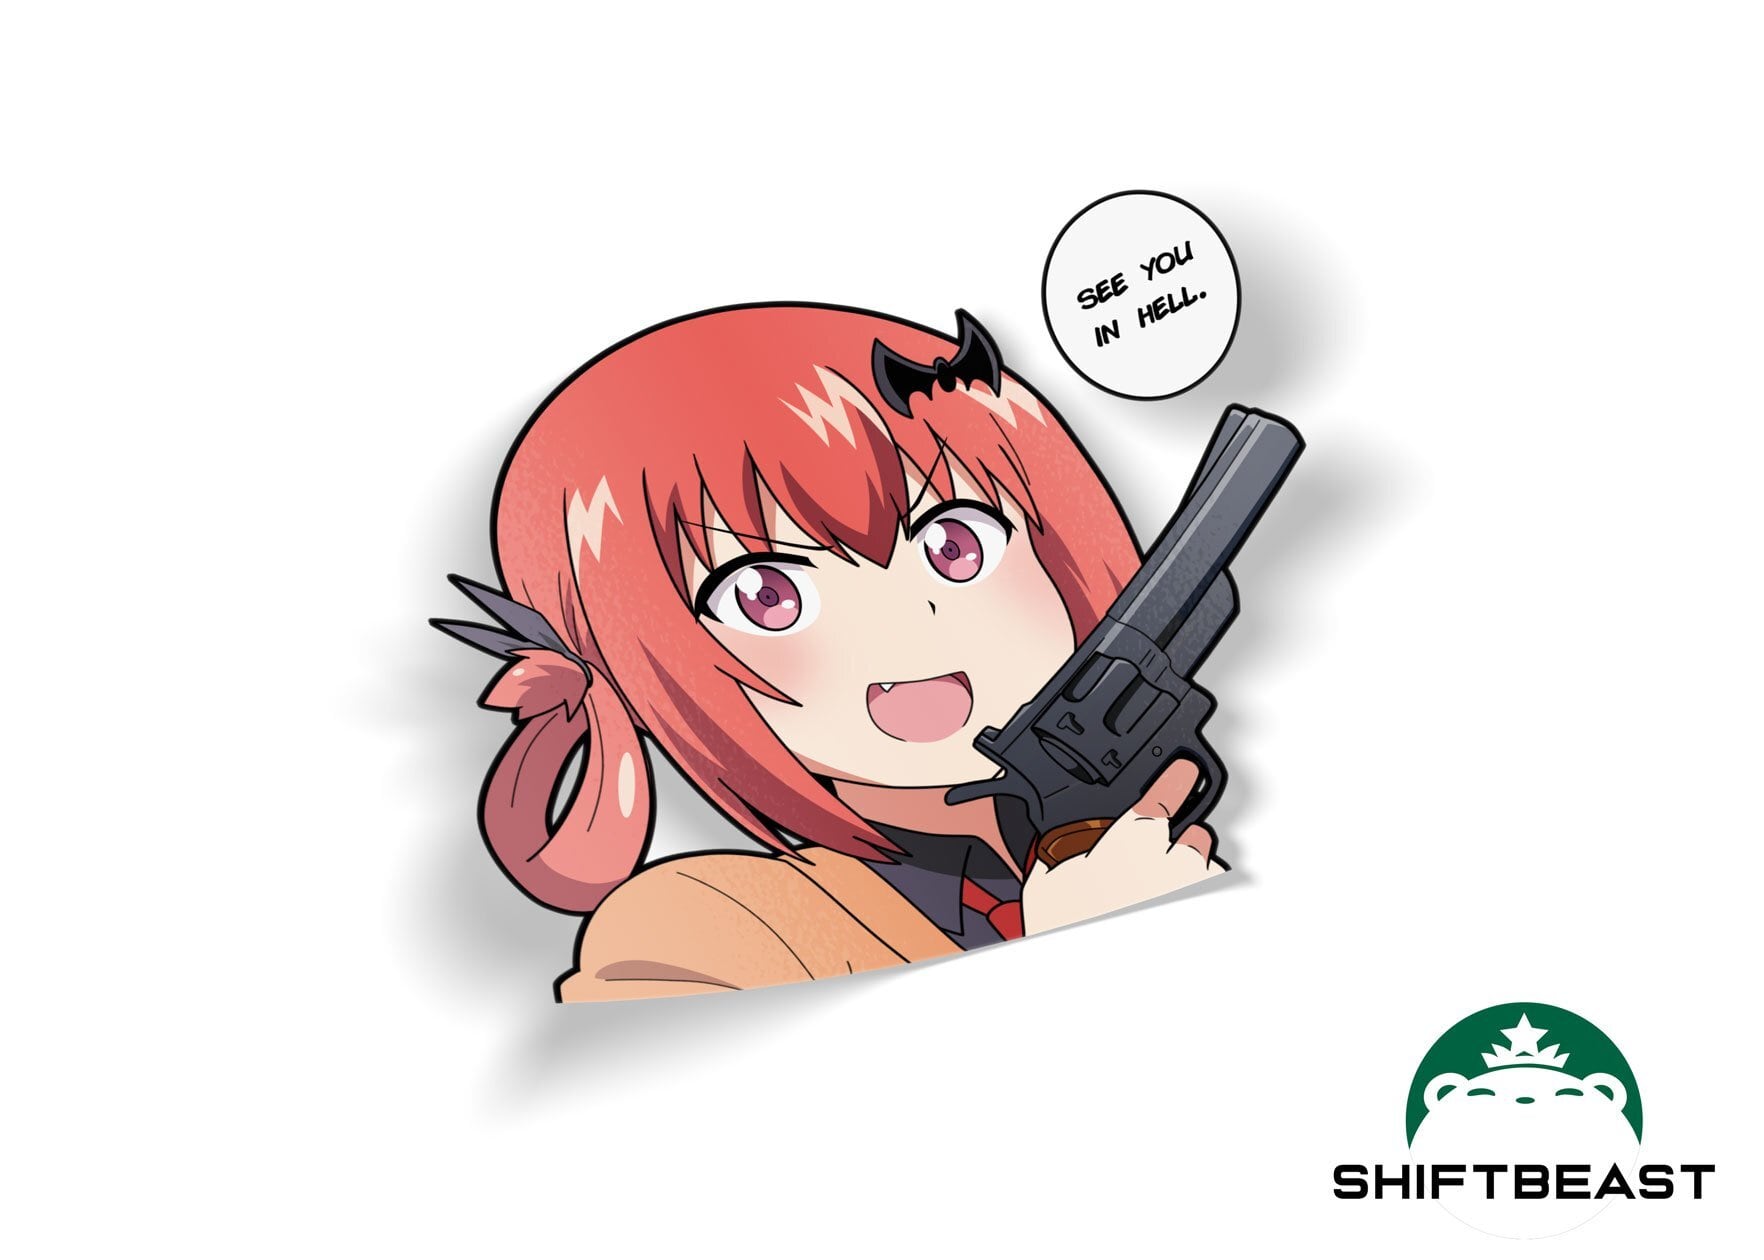 SHIFT BEAST　Satania ”SEE YOU IN HELL”